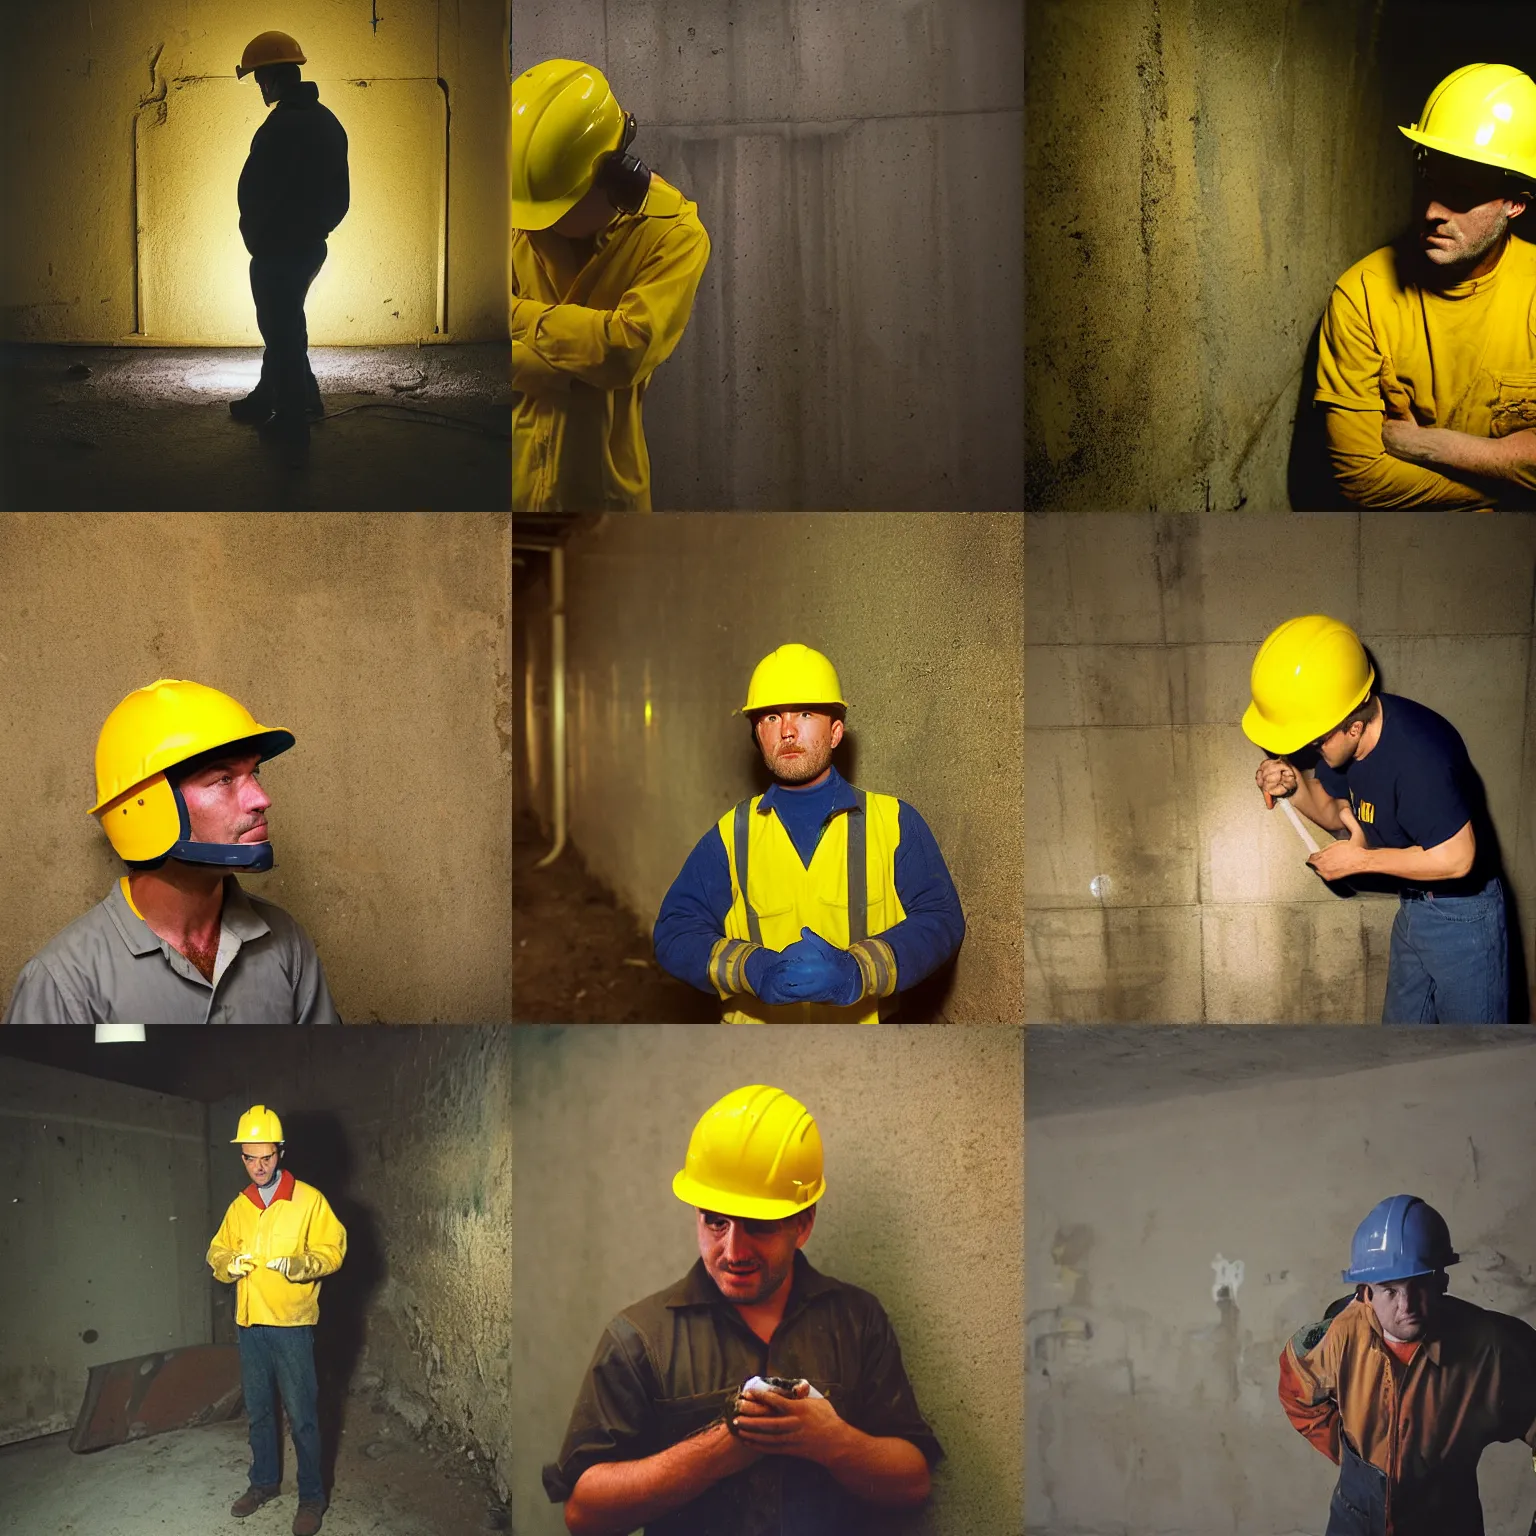 Prompt: A man, working clothes, yellow helmet, headlight, face, dirty Concrete wall ; basement , night; 90's professional color photograph, close up, view from front.